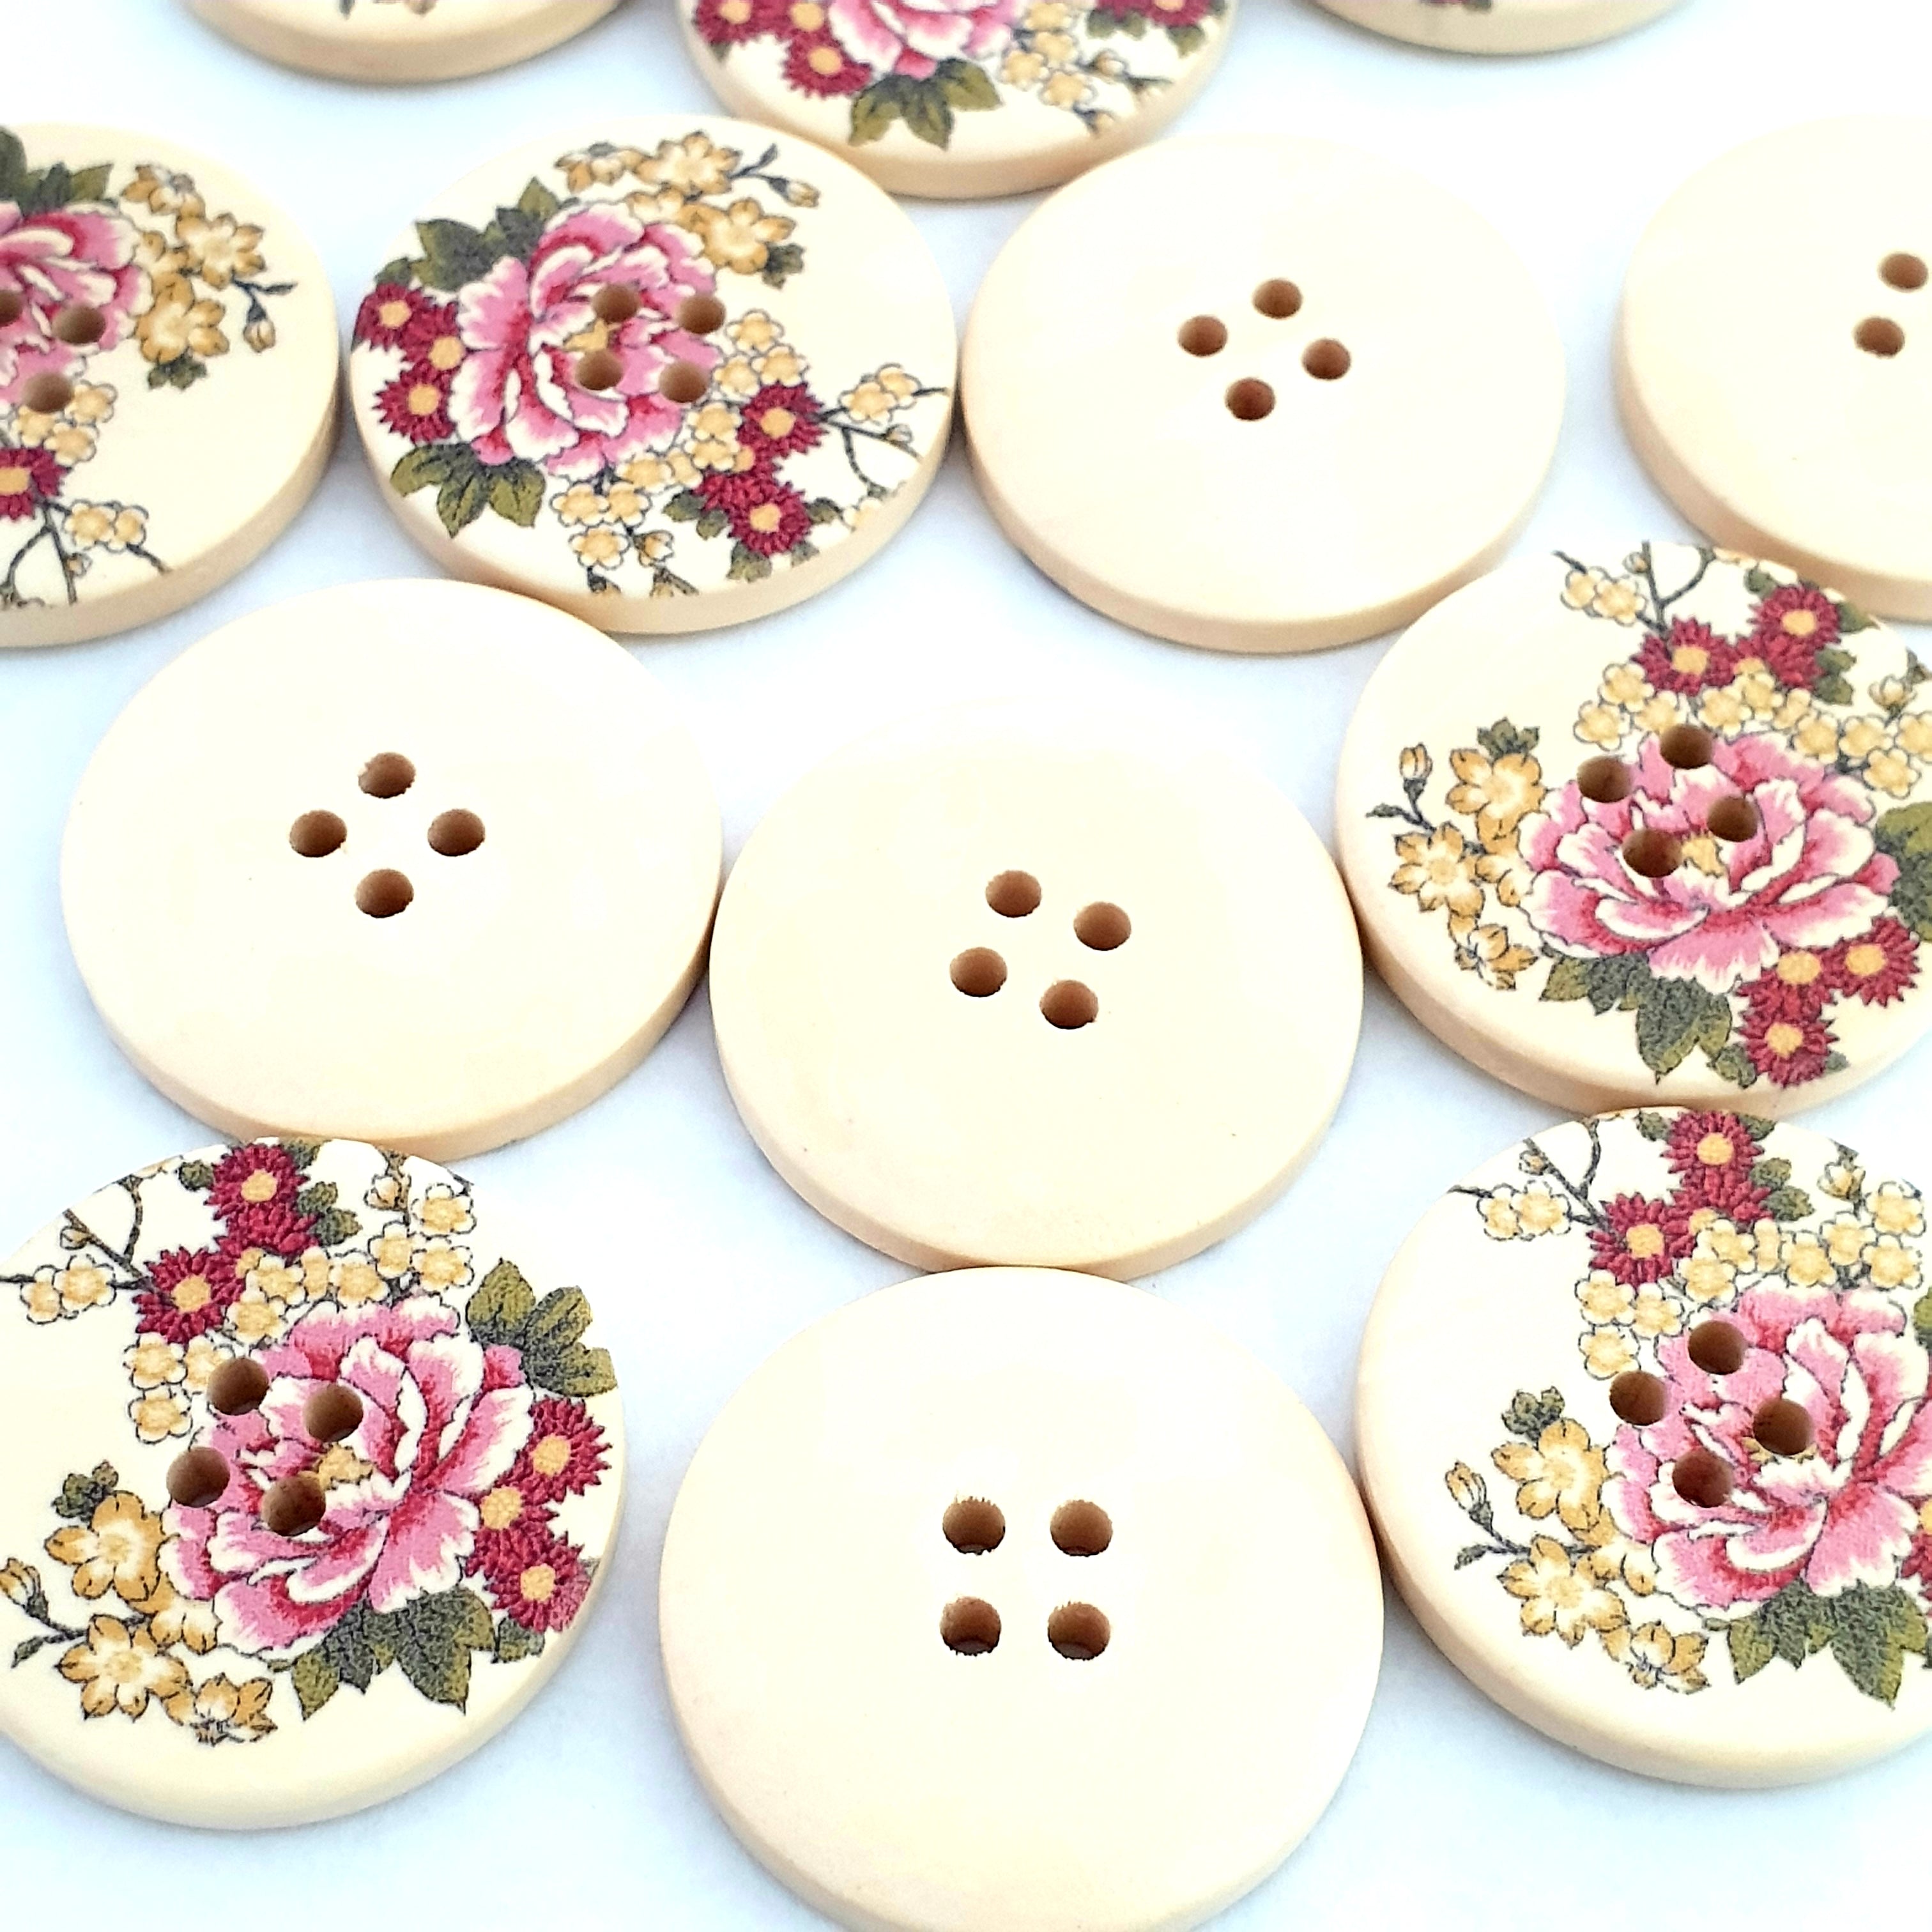 MajorCrafts 16pcs 30mm Red Yellow Carnation Flower Pattern 4 Holes Large Wooden Sewing Buttons